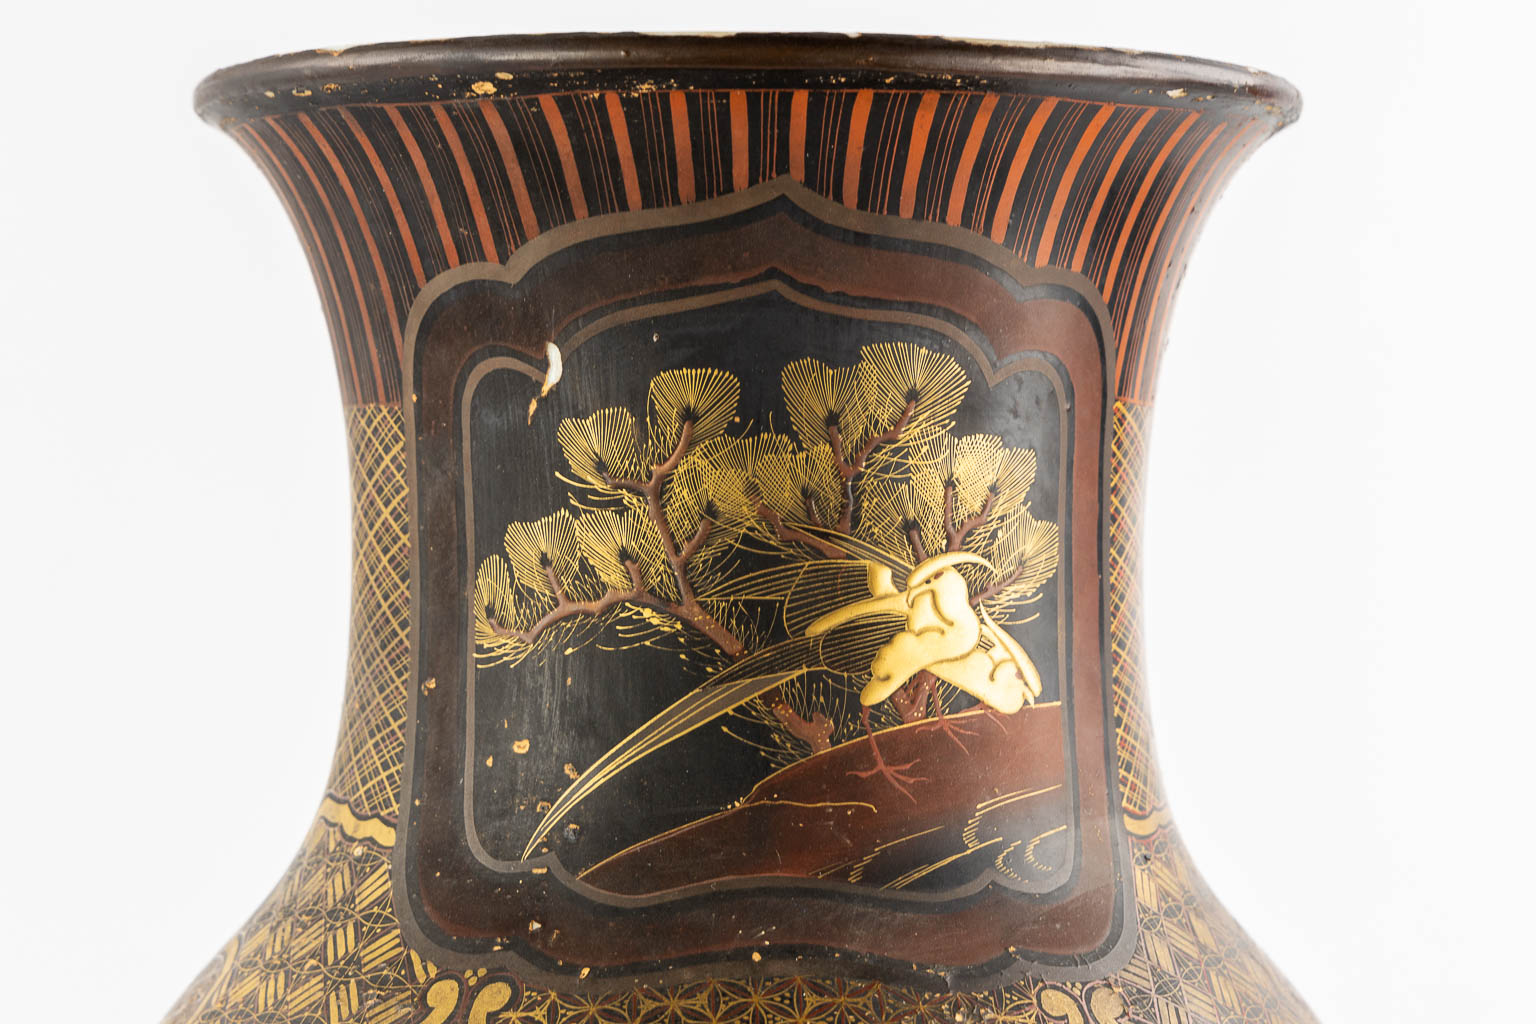 A Japanese porcelain vase, finished with red and gold lacquer. Meij period. (H:61 x D:27 cm) - Image 12 of 14